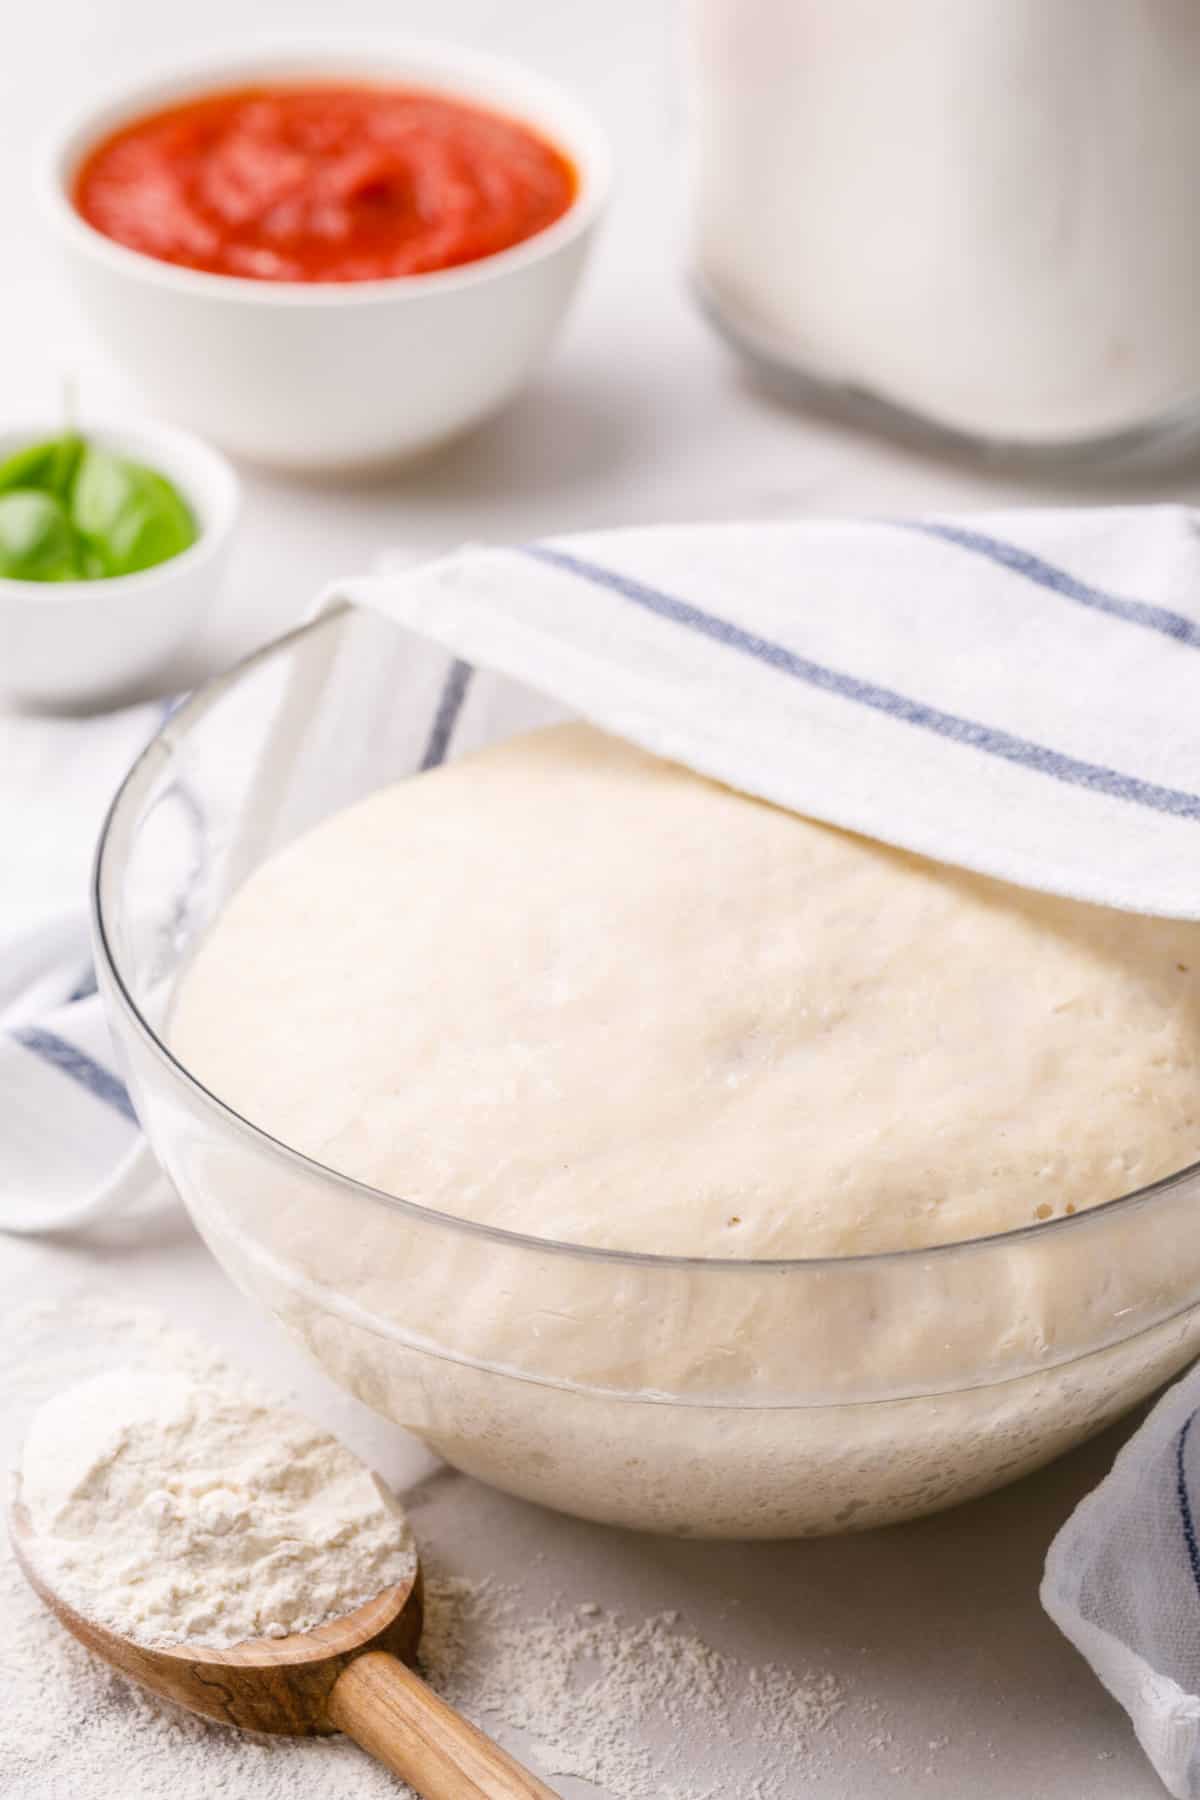 proofed homemade pizza dough sitting in a glass bowl partially covered with a kitchen towel